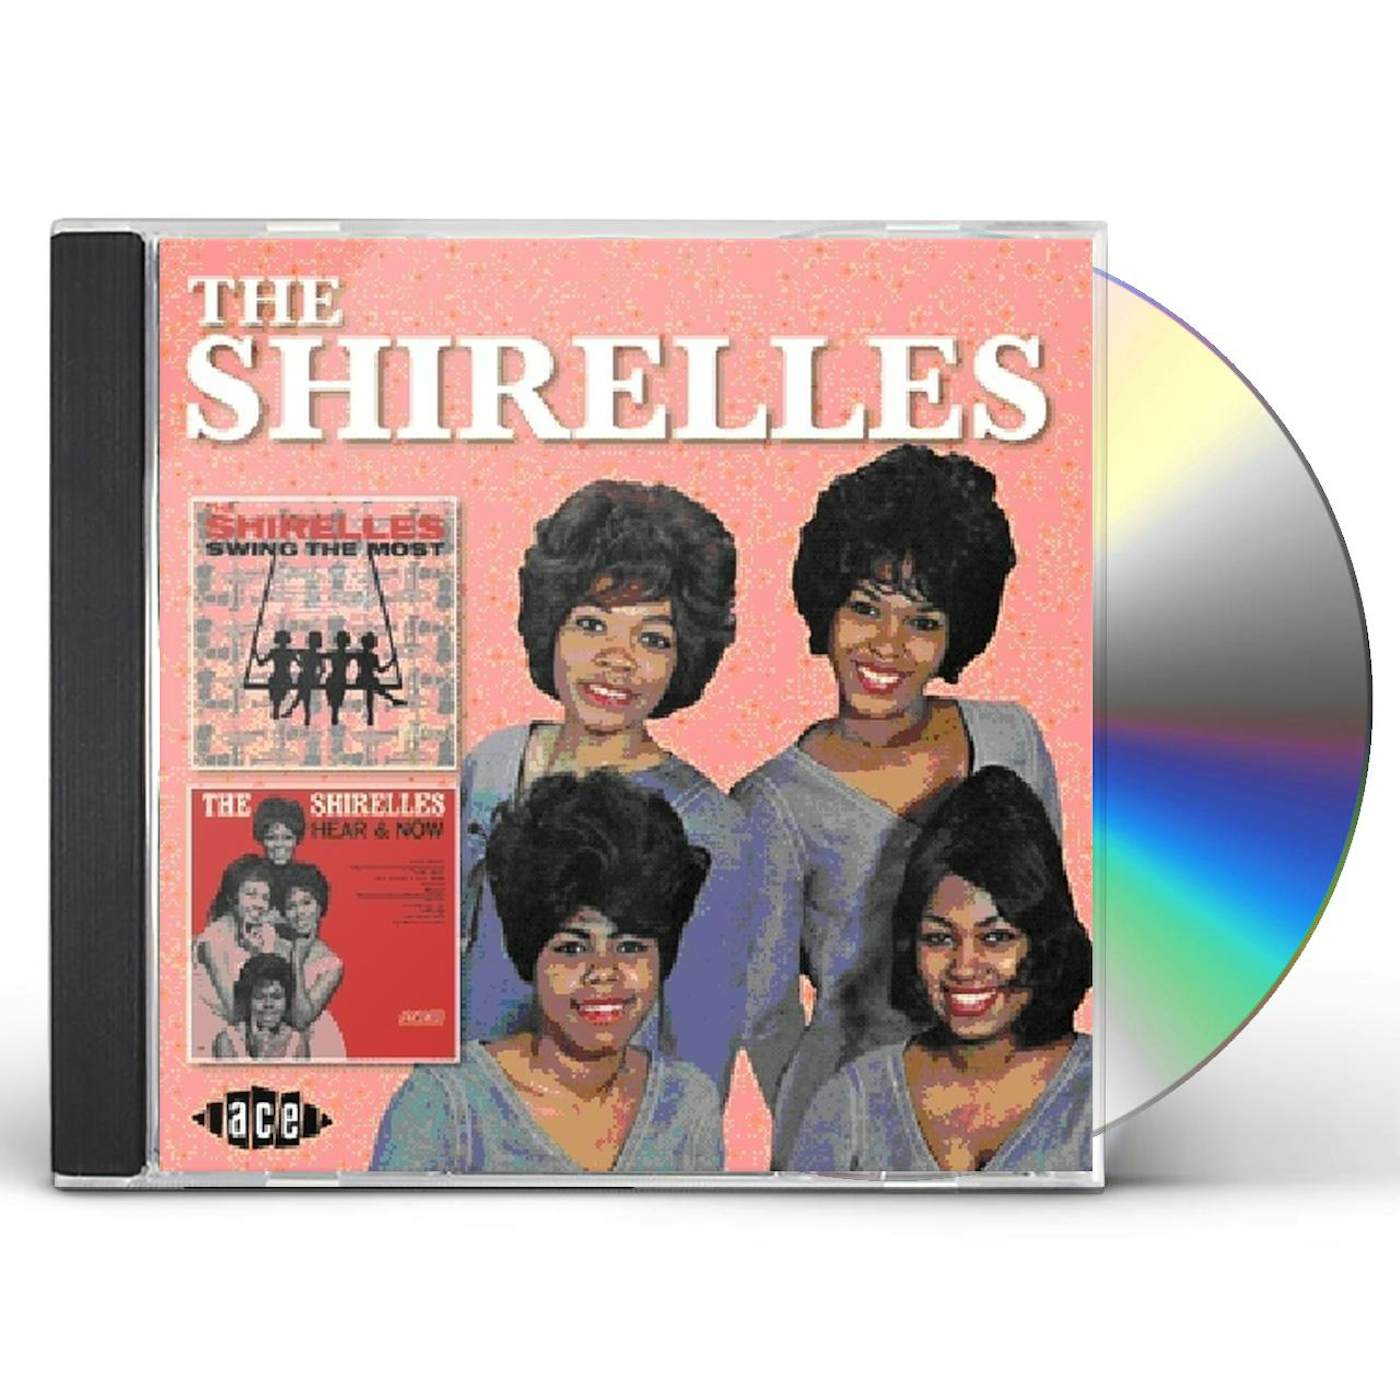 The Shirelles SWING THE MOST / HEAR & NOW CD